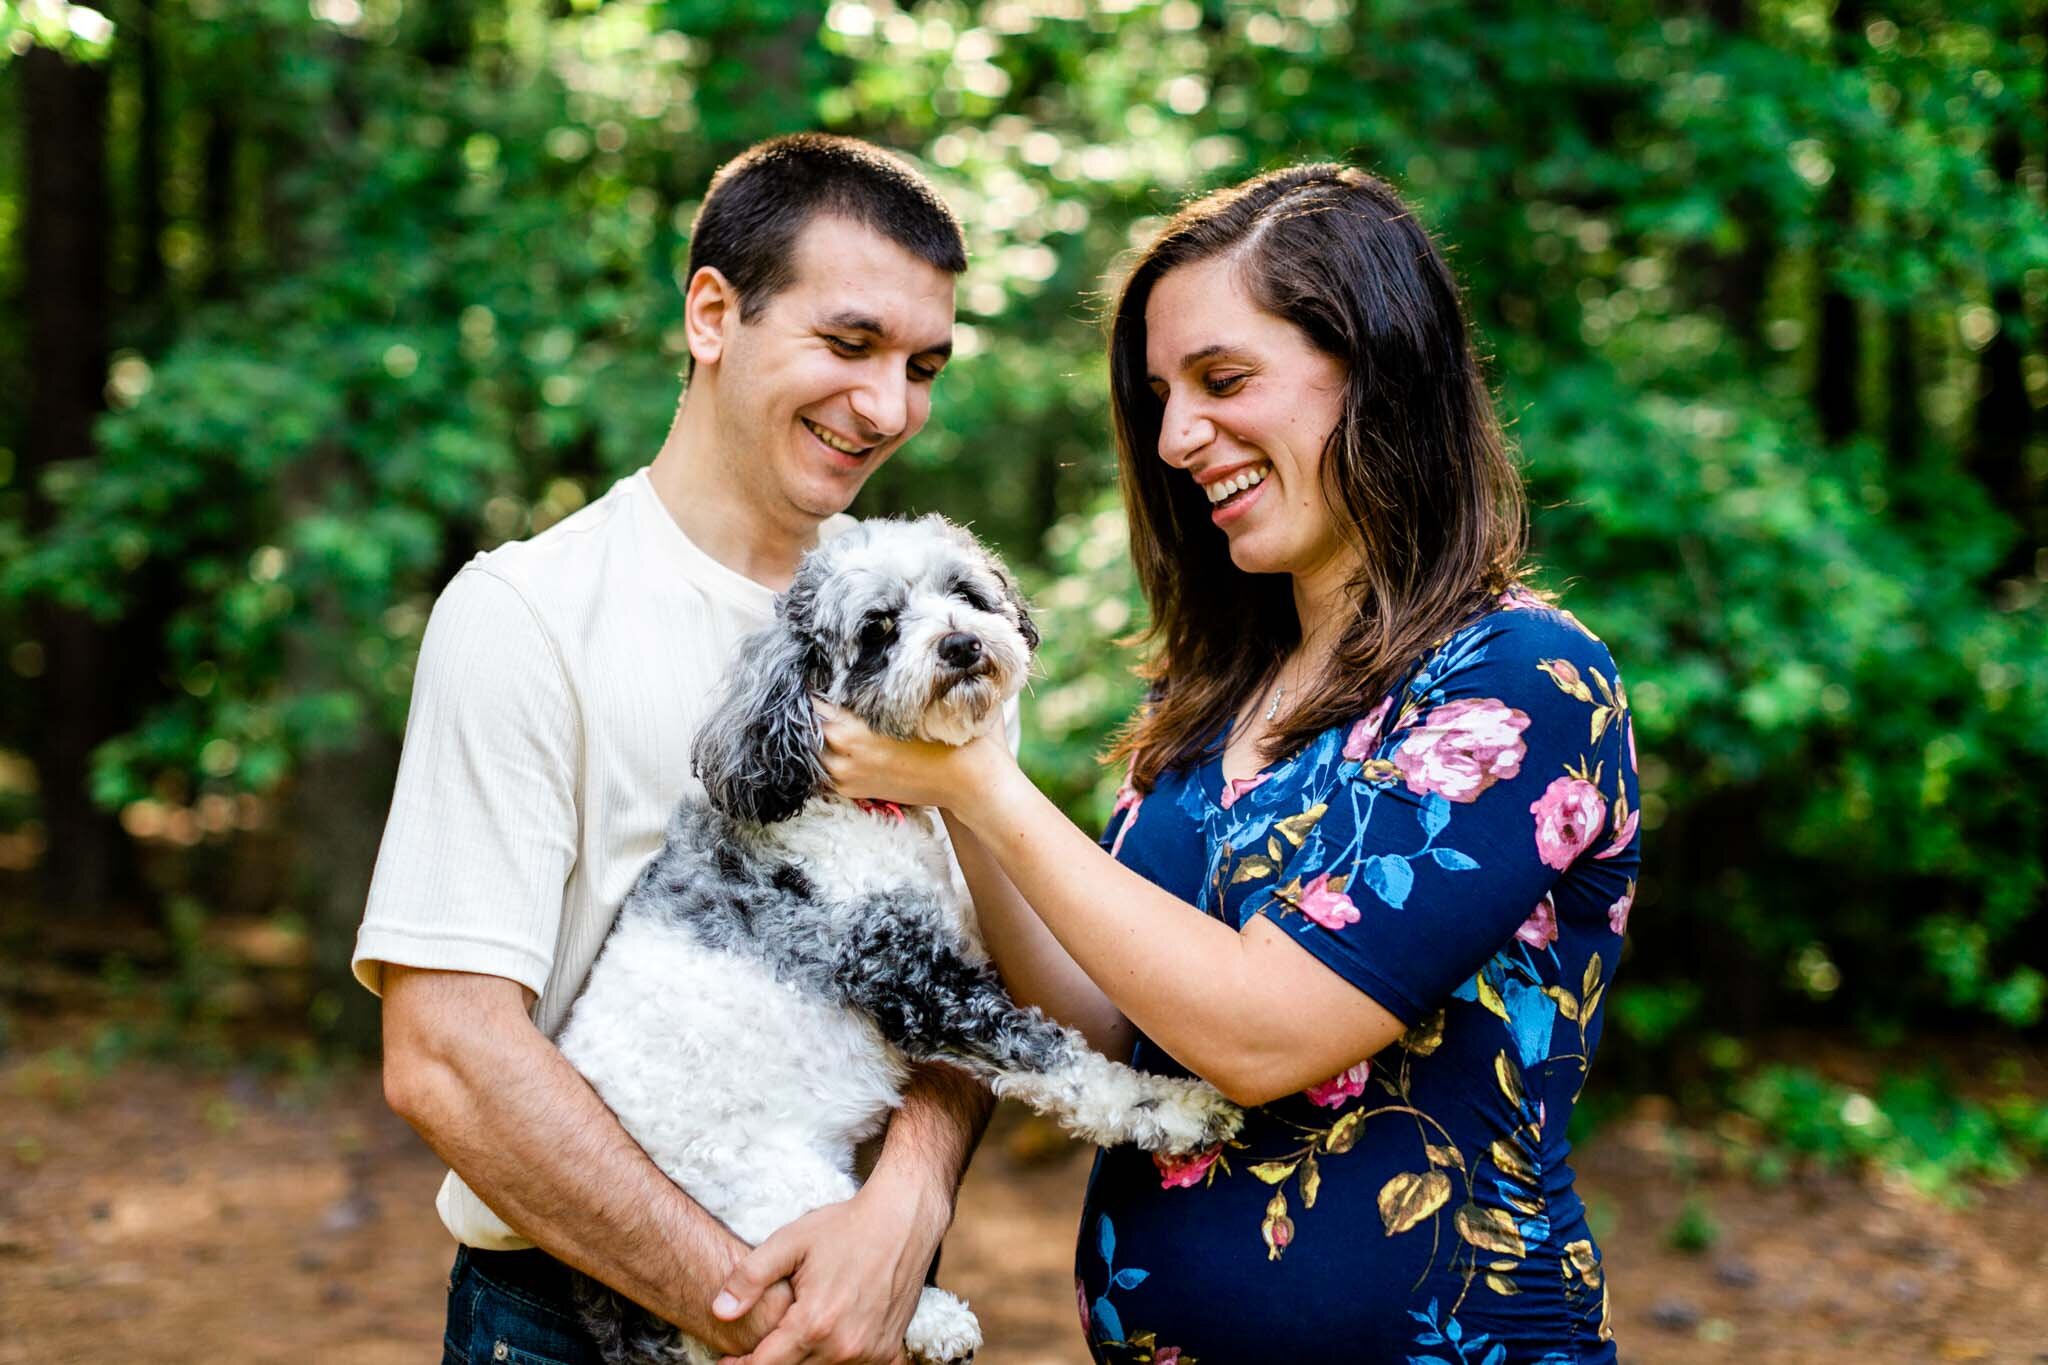 Raleigh Maternity Photographer | By G. Lin Photography | Umstead Park | Couple petting dog and laughing